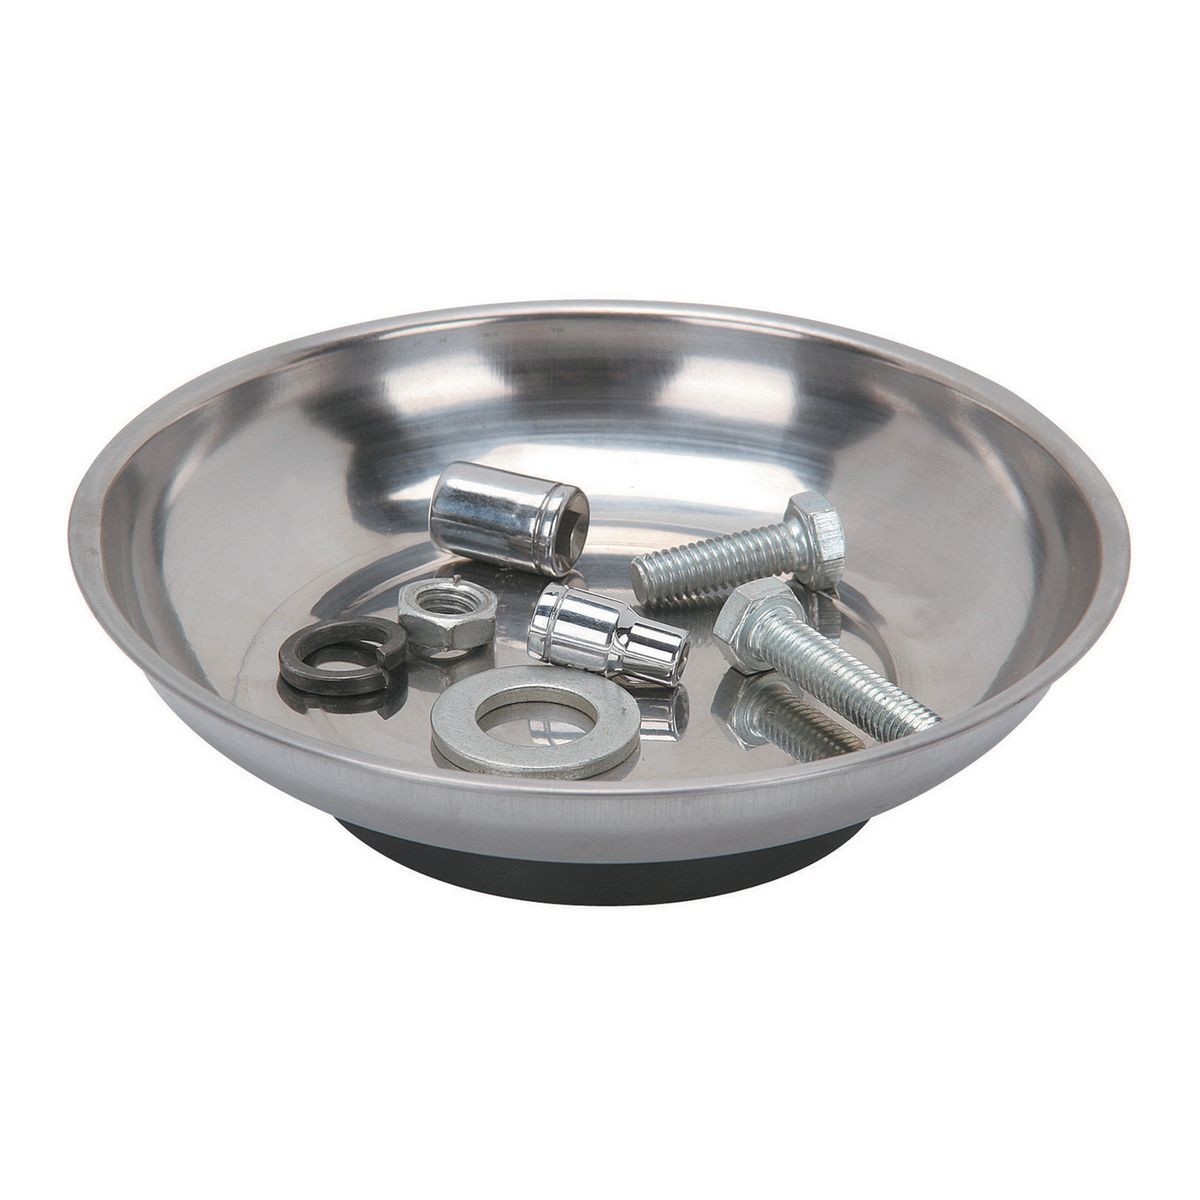 6 ROUND MAGNETIC BOWL